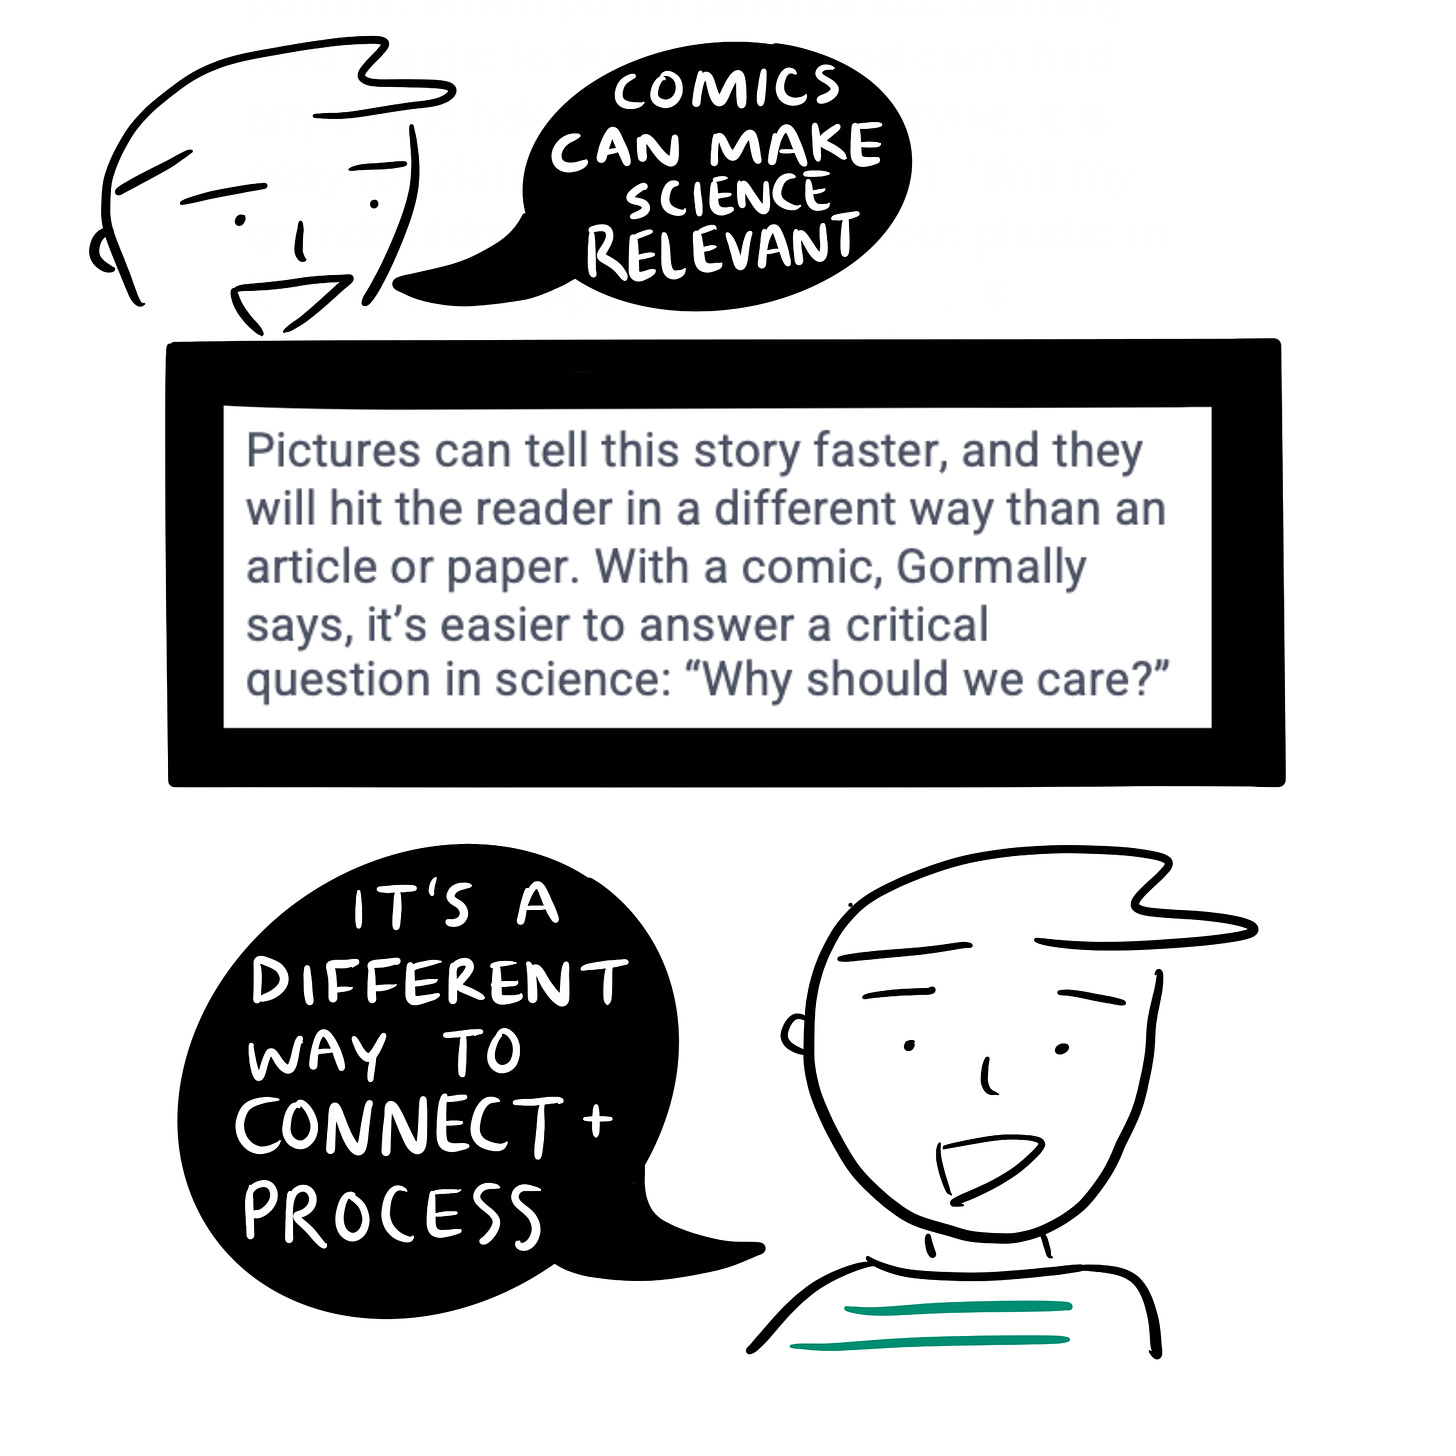 Cartoonist saying “comics can make science relevant.” Pictures can tell this story faster and they will hit the reader in a different way than an article or paper. With a comic, Gormally says, it’s easier to answer a critical question in science, “why should we care?” Cartoonist saying “it’s a different way to connect and process.”  